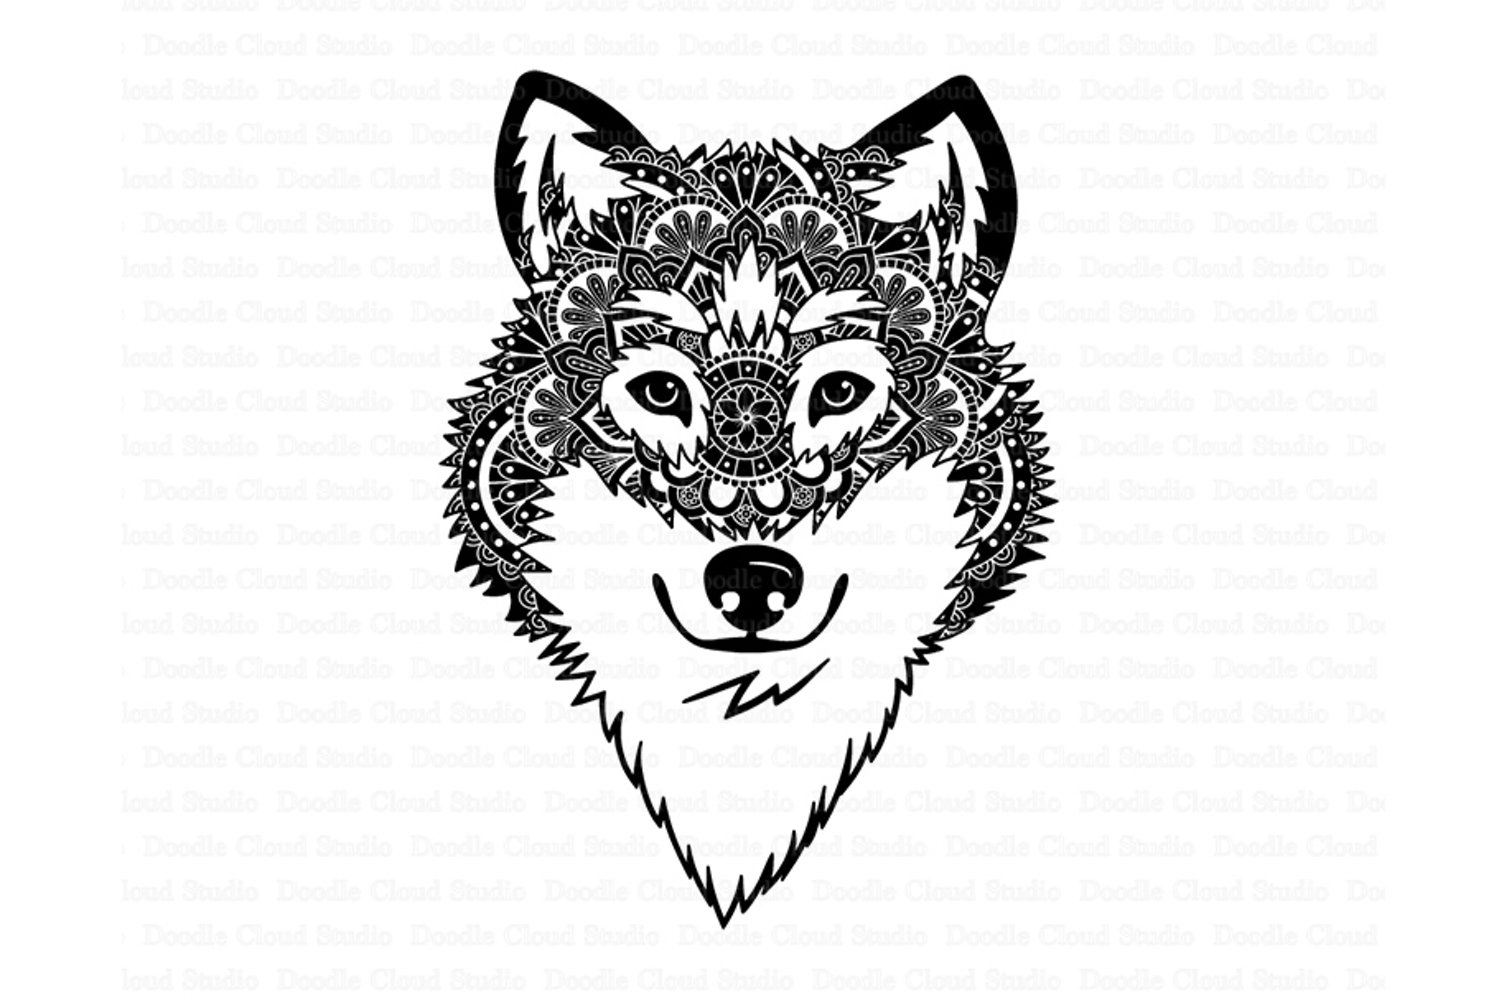 Black and white drawing of a wolf's head.